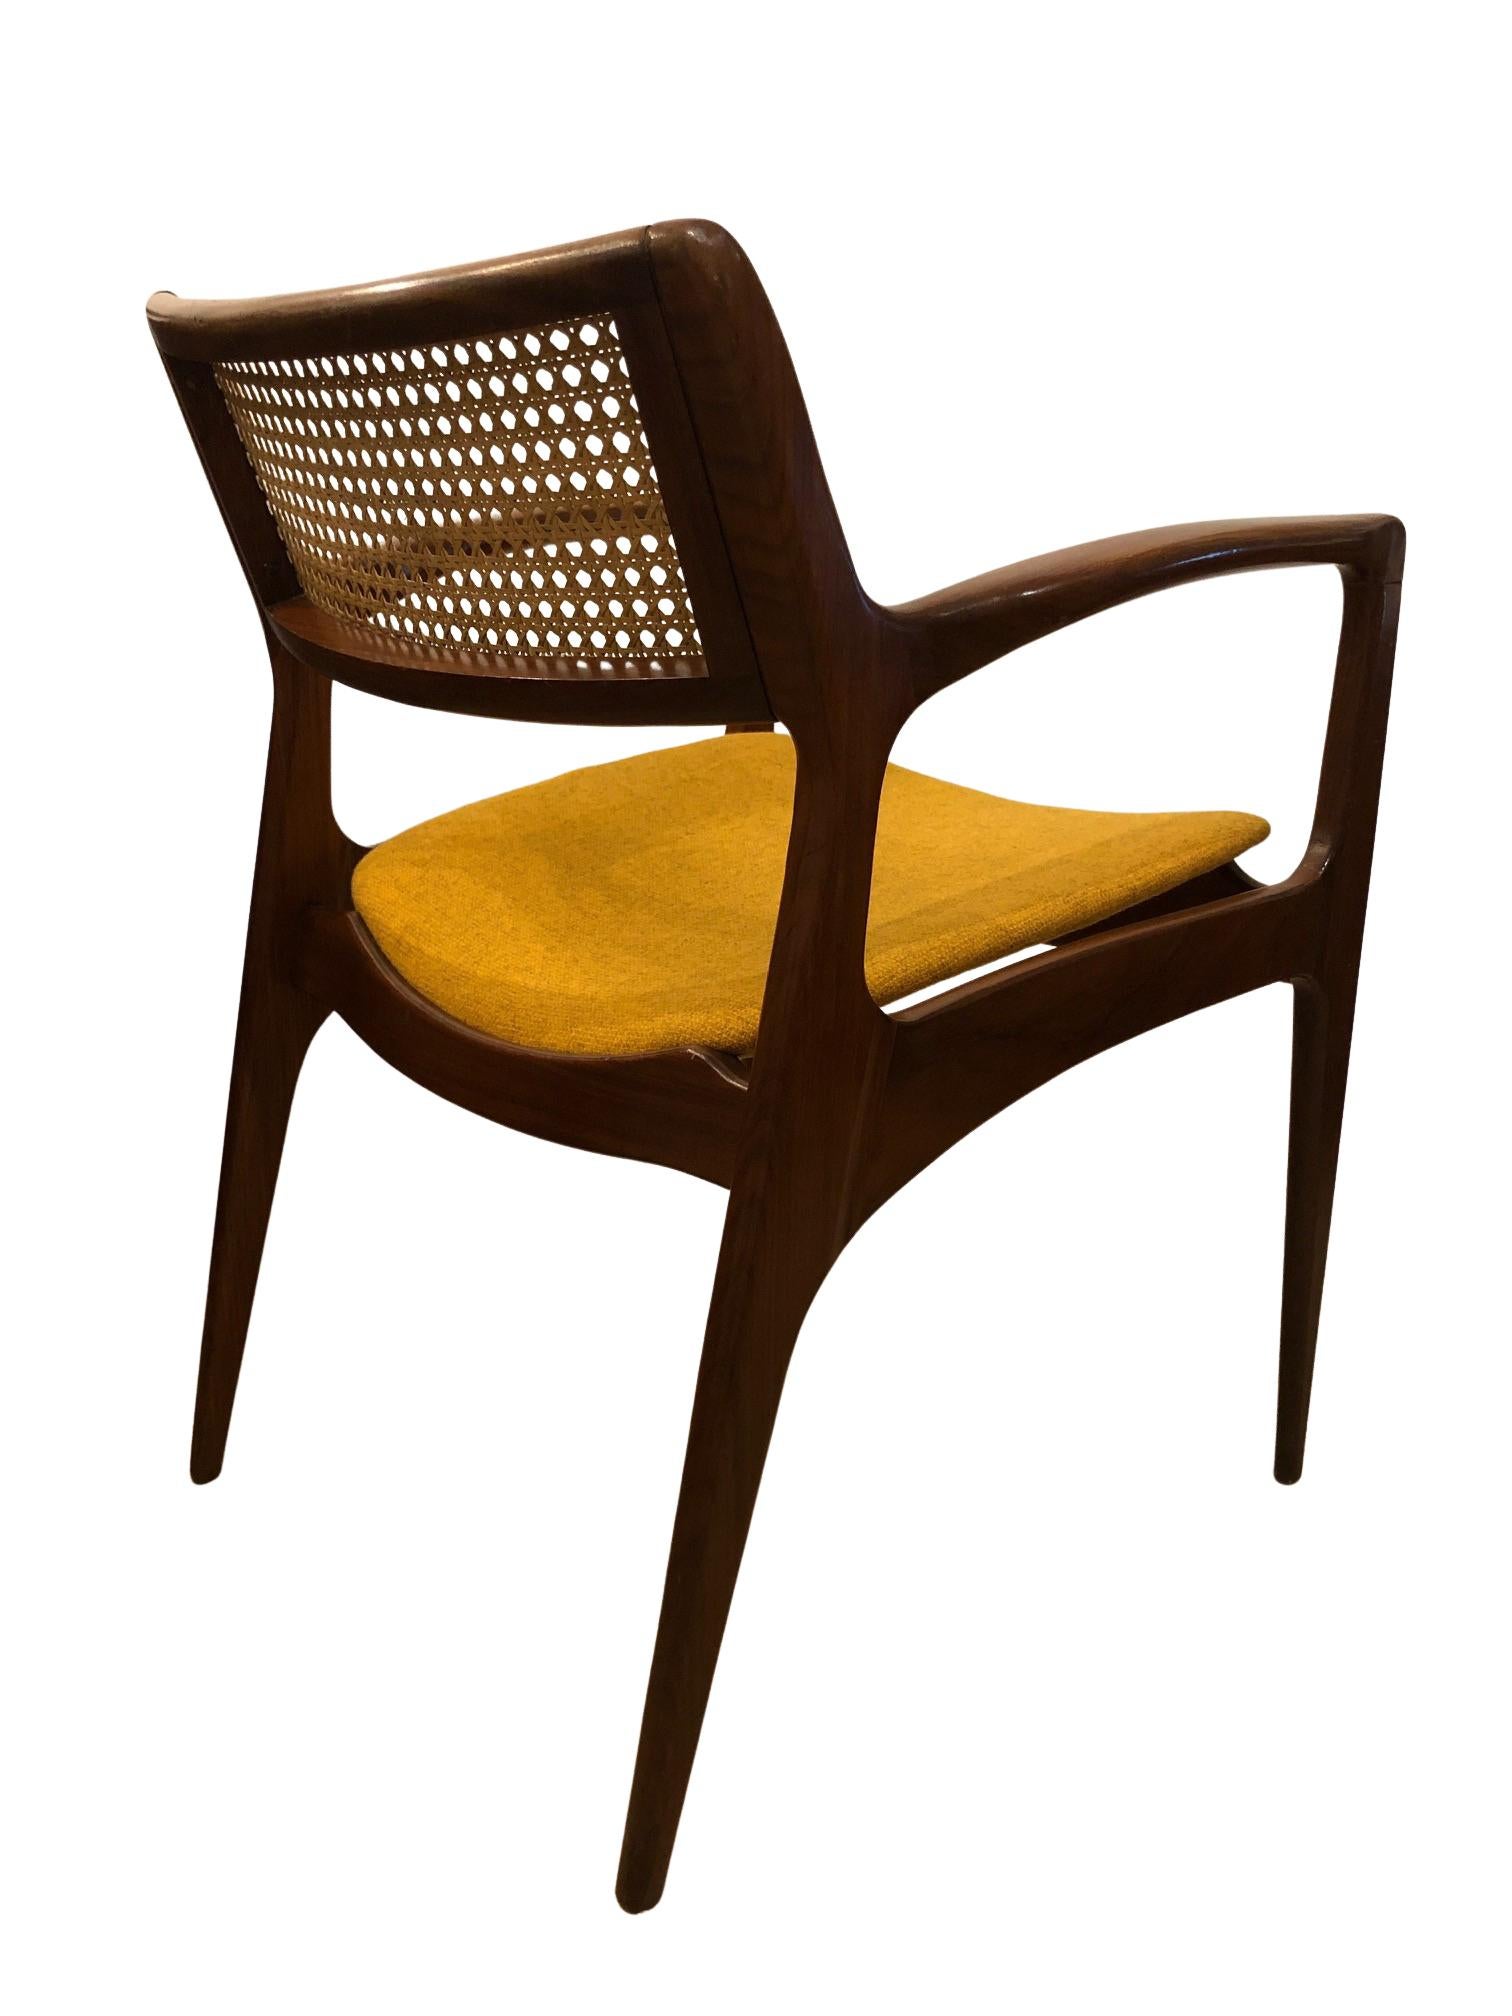 Chair model GFM-120 appears extremely rarely on the antiquarian market. 

It was designed by Edmund Homa, manufactured by Goscinska Furniture Factory in Poland in the 1960s. Professor Edmund Homa was Polish architect, designer of industrial design